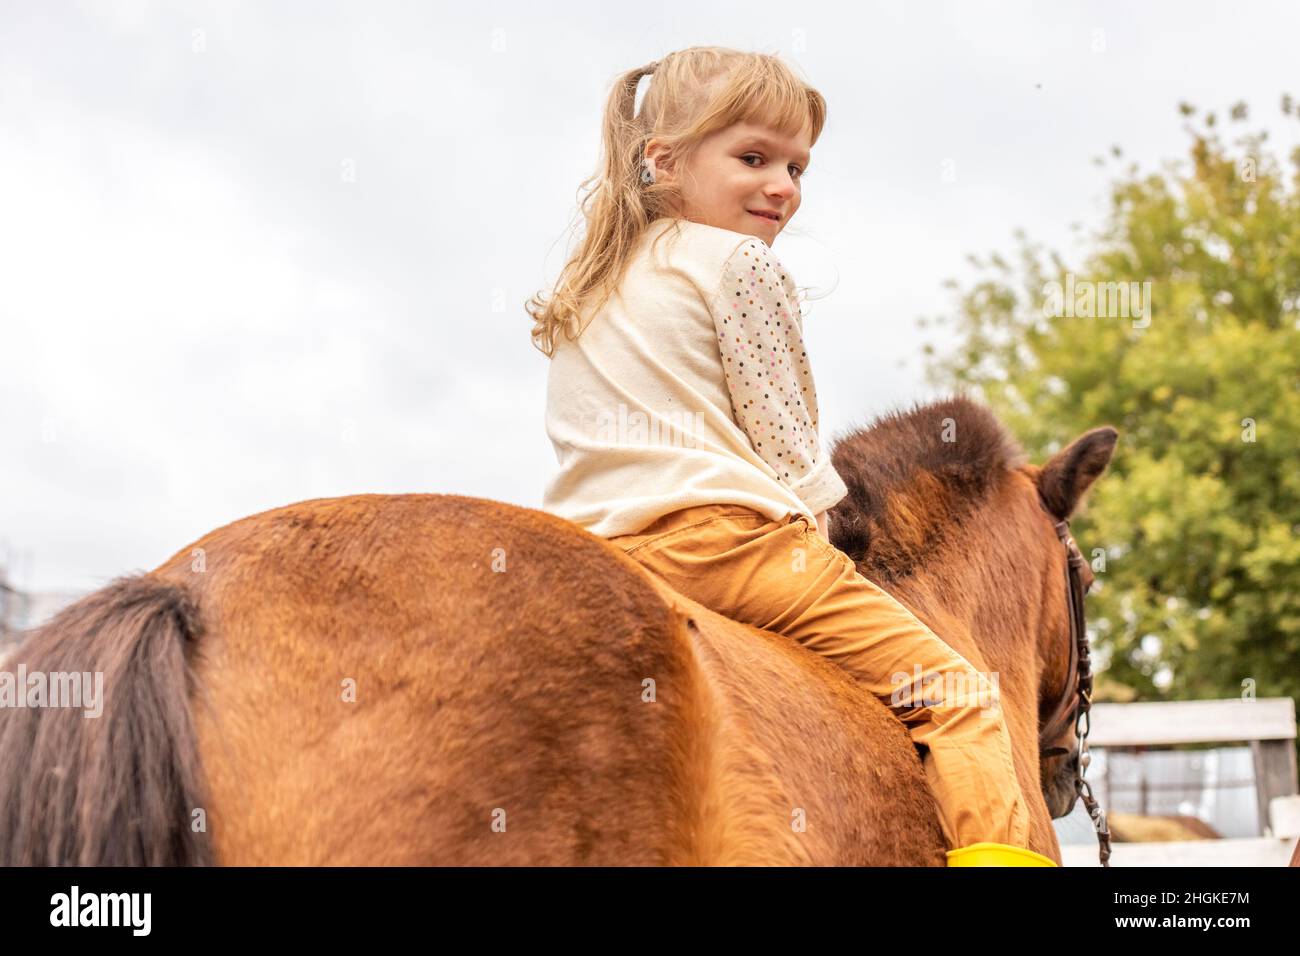 Little girl riding pony without saddle, rear view Stock Photo